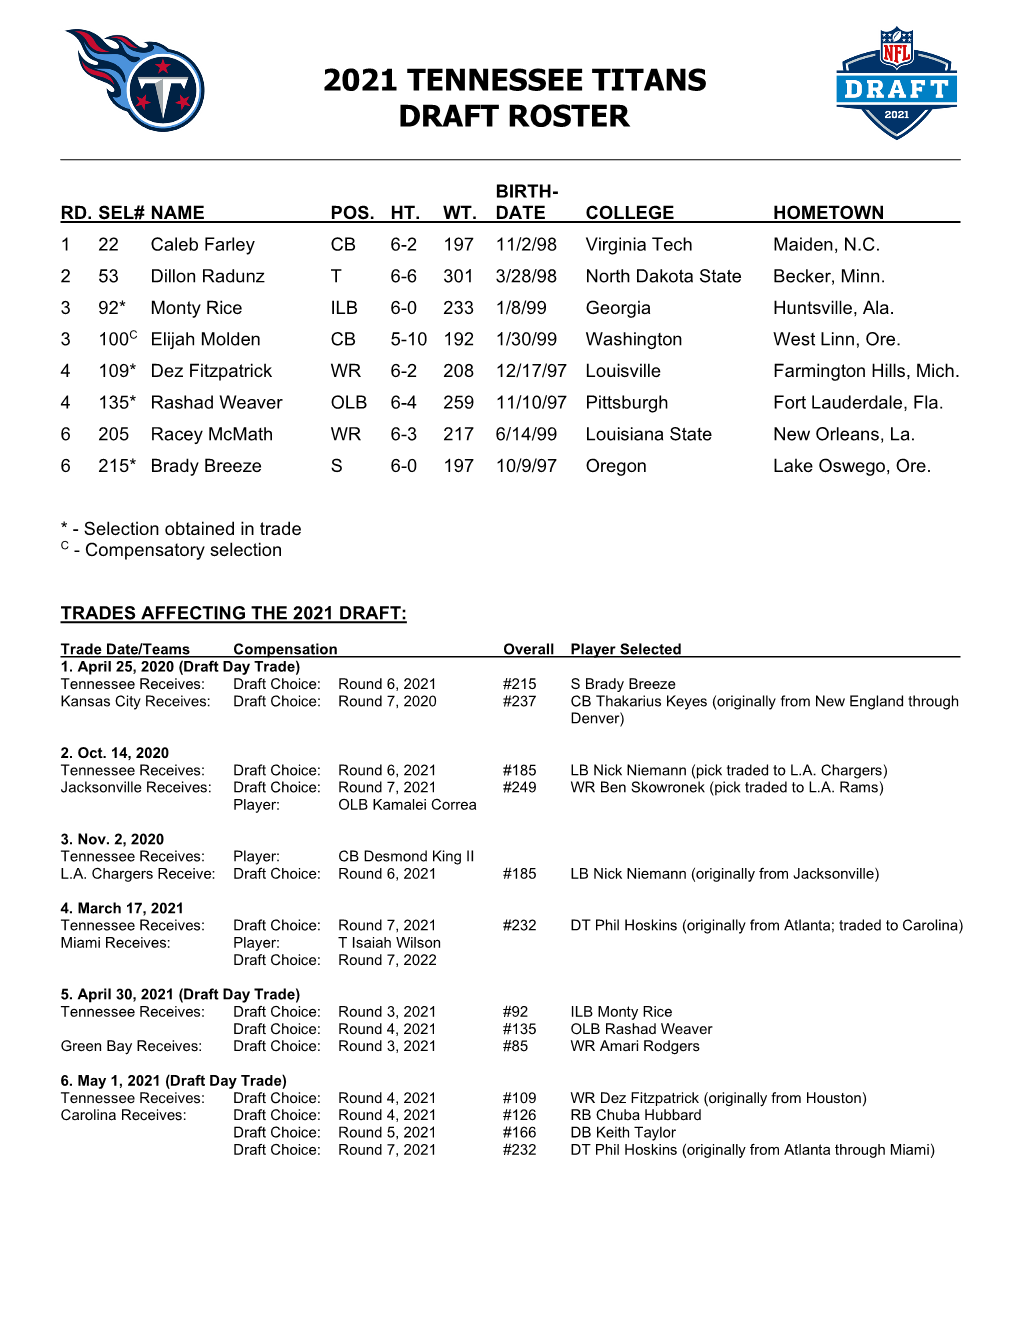 2021 Tennessee Titans Draft Roster